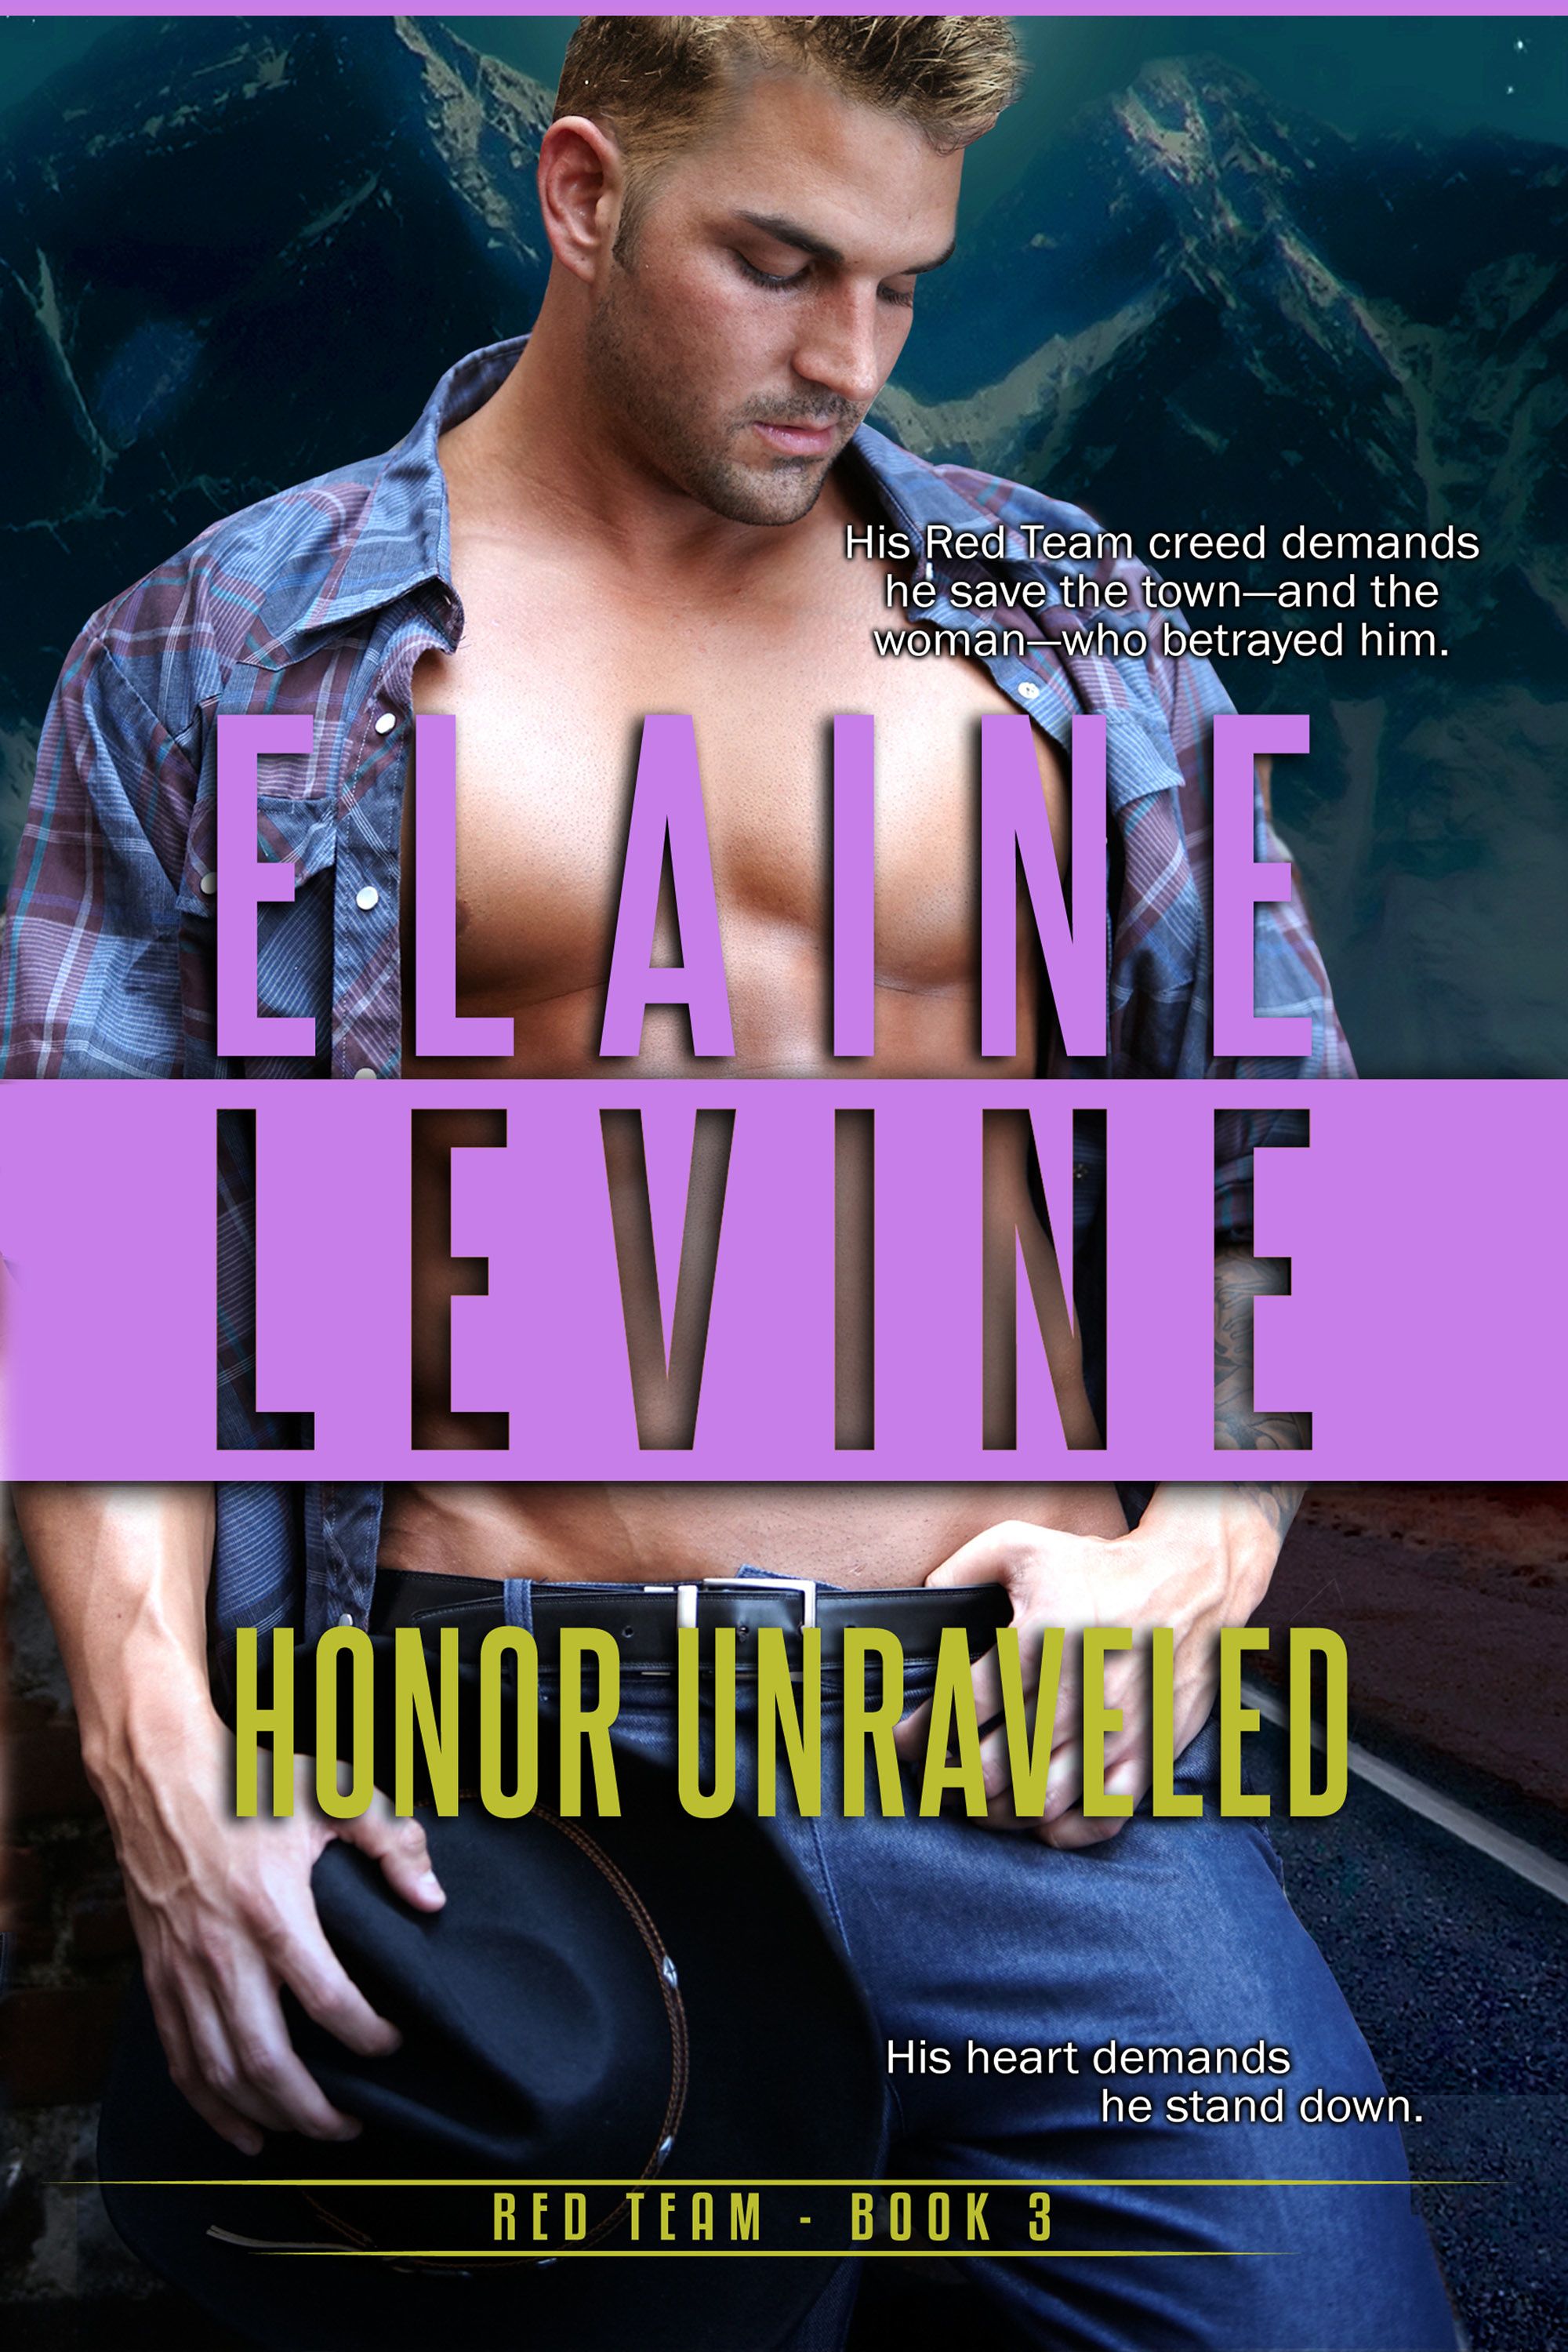 Honor Unraveled (Red Team: Book 3) by Elaine Levine